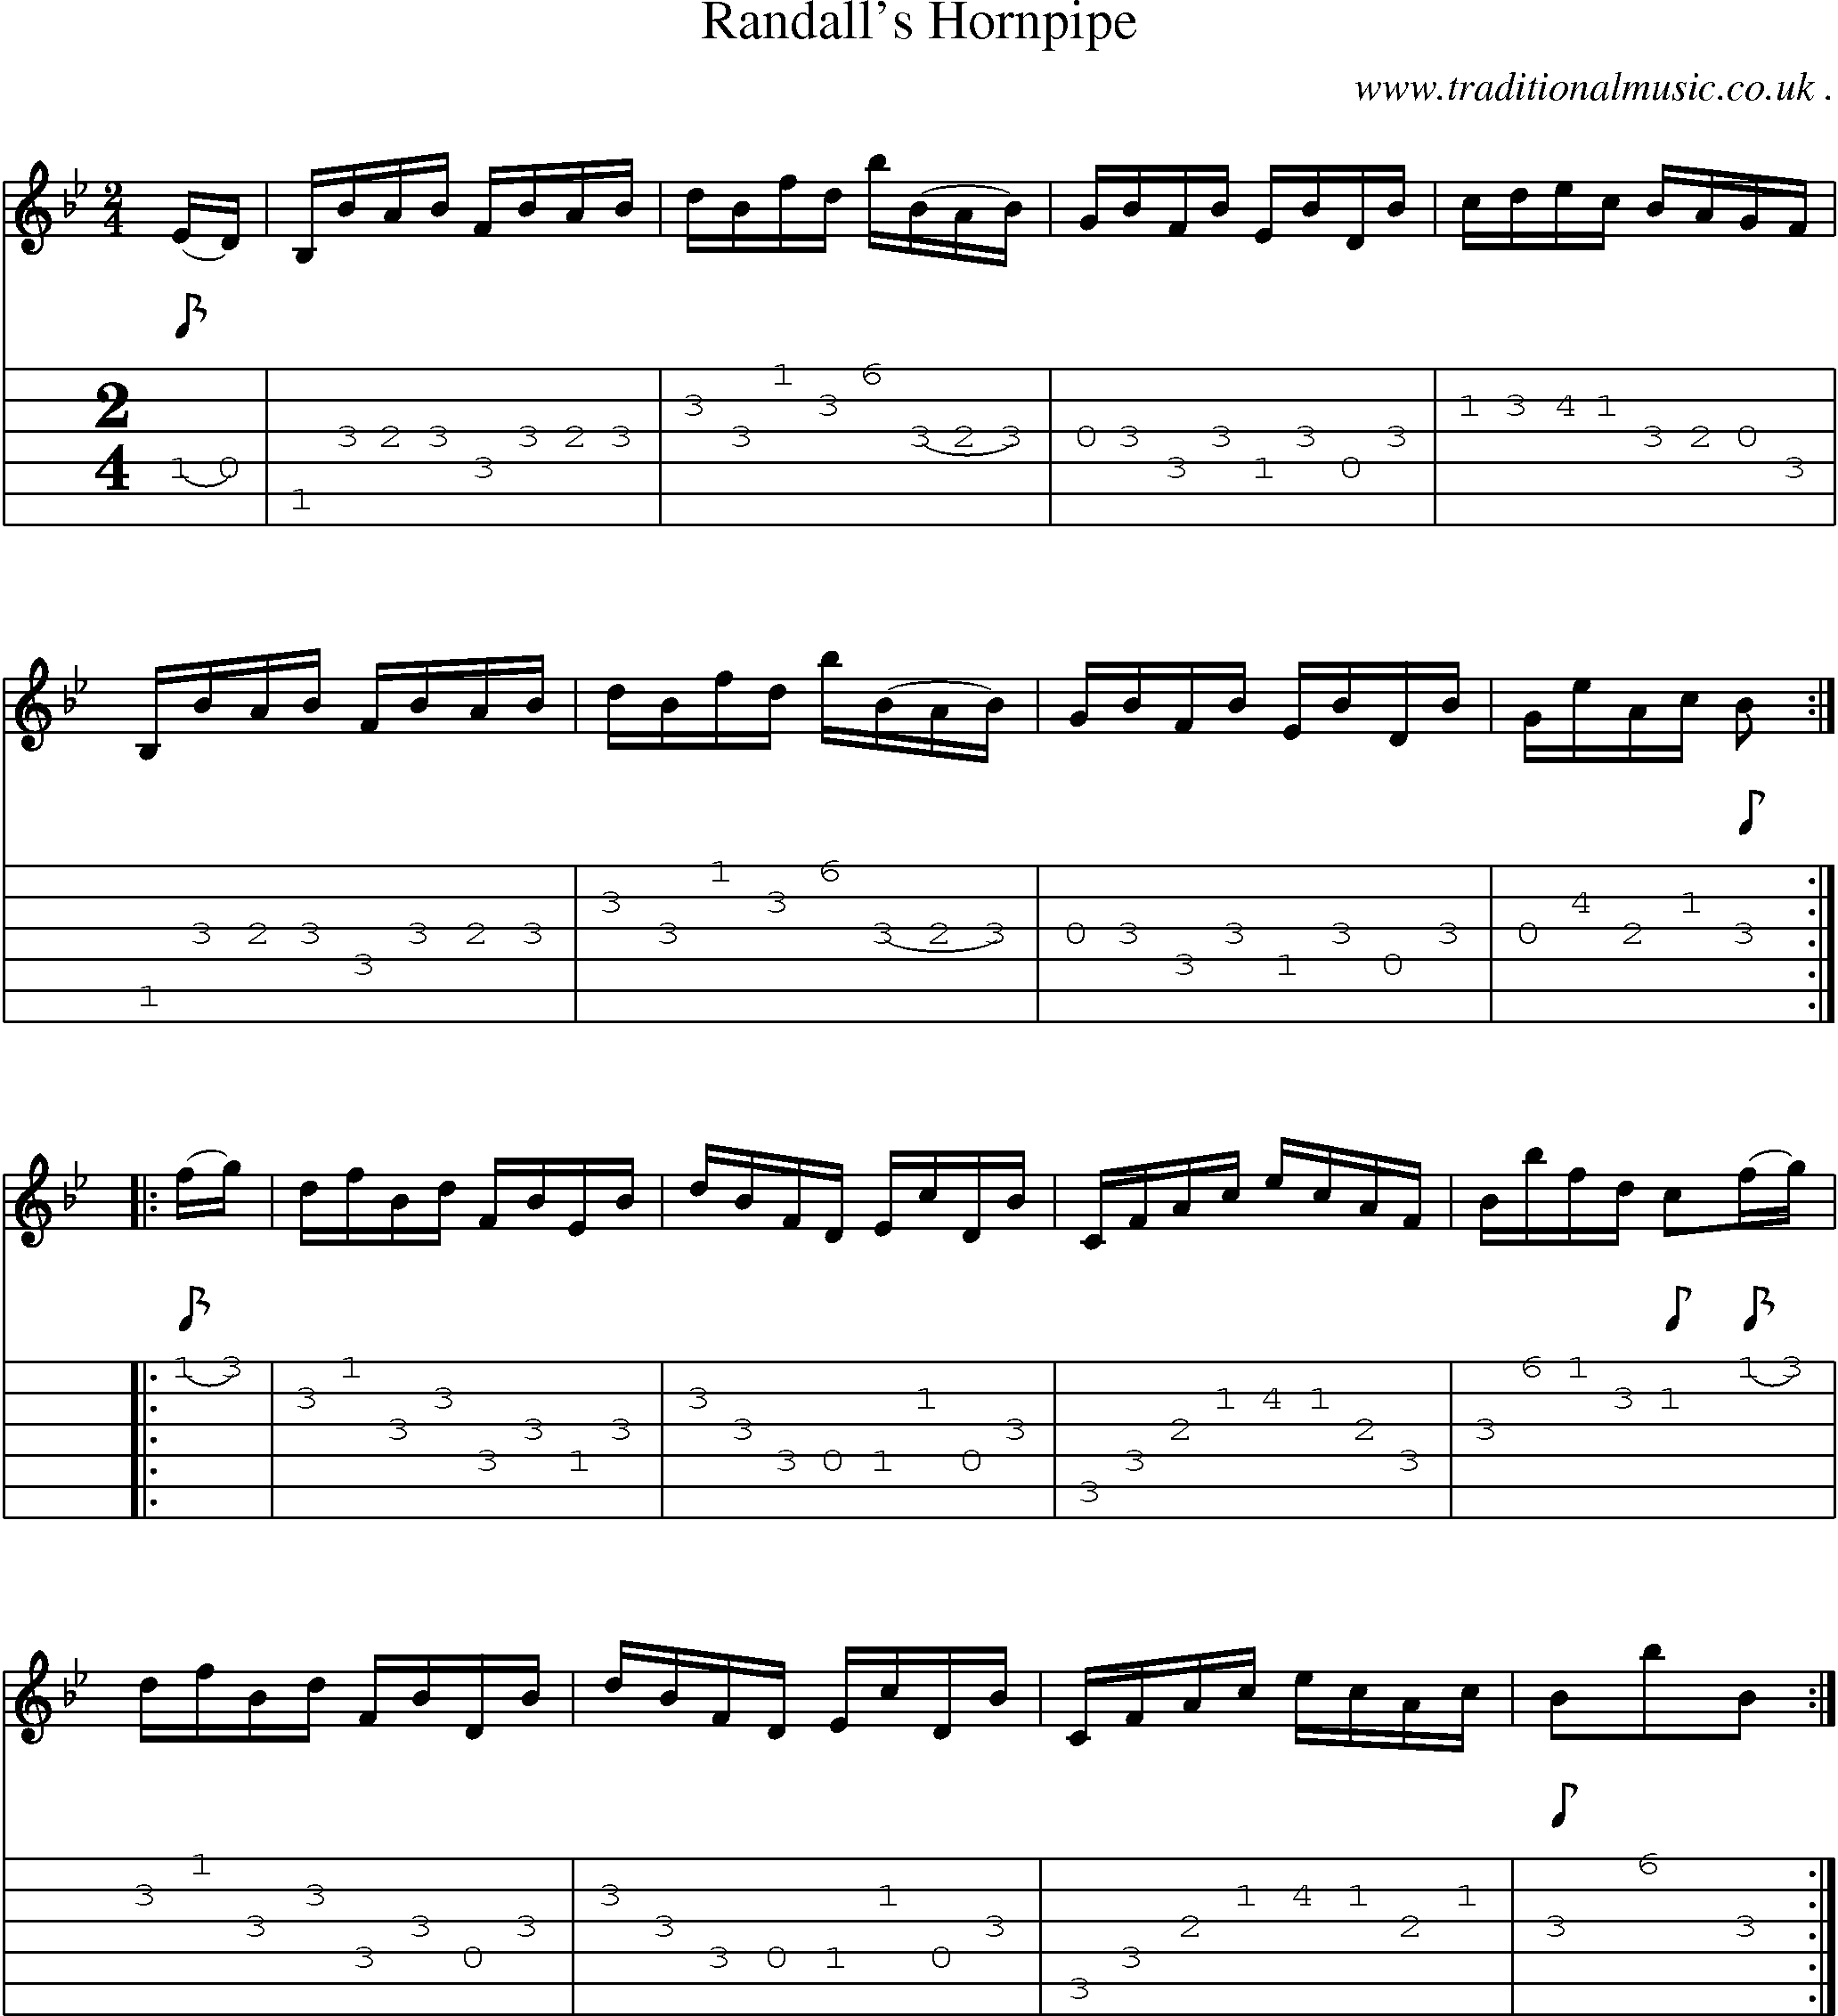 Sheet-Music and Guitar Tabs for Randalls Hornpipe